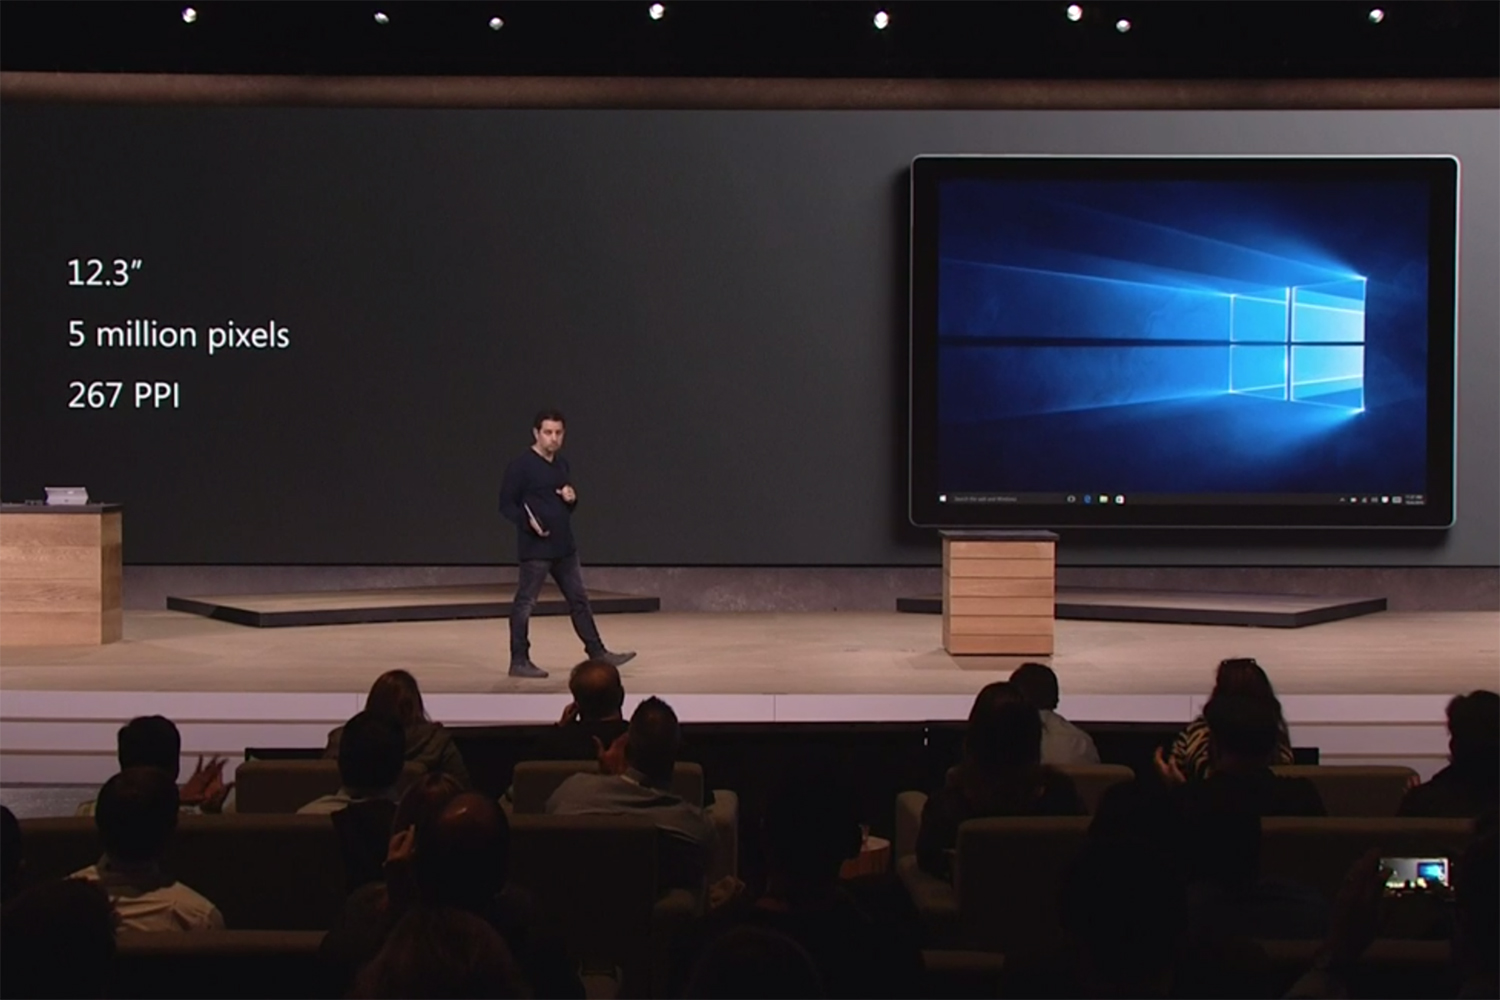 microsofts surface pro 4 rides the wave 3 started surfacepro4 1